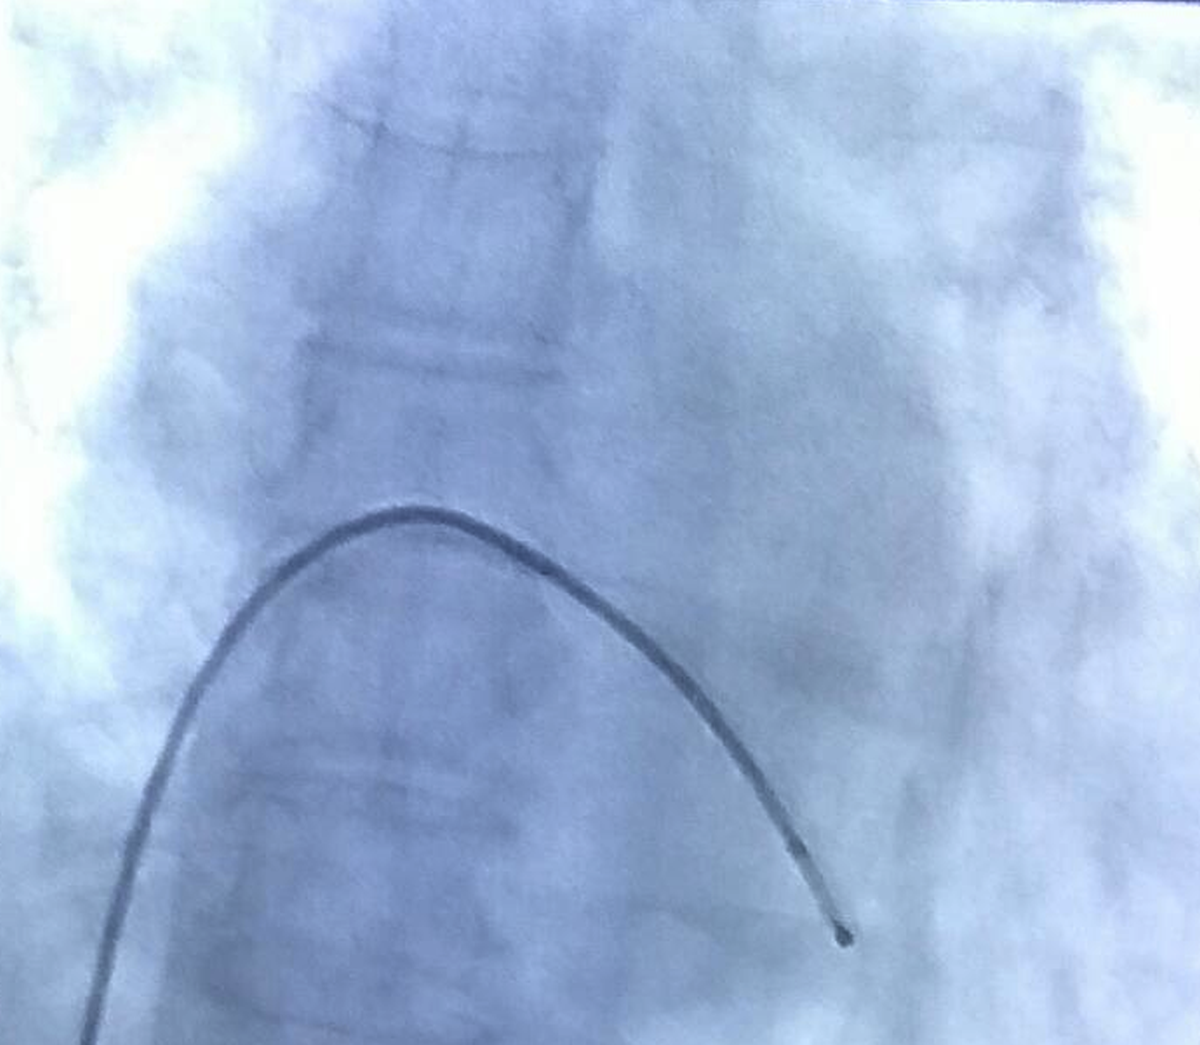 Temporary pacing electrode at right ventricular apex